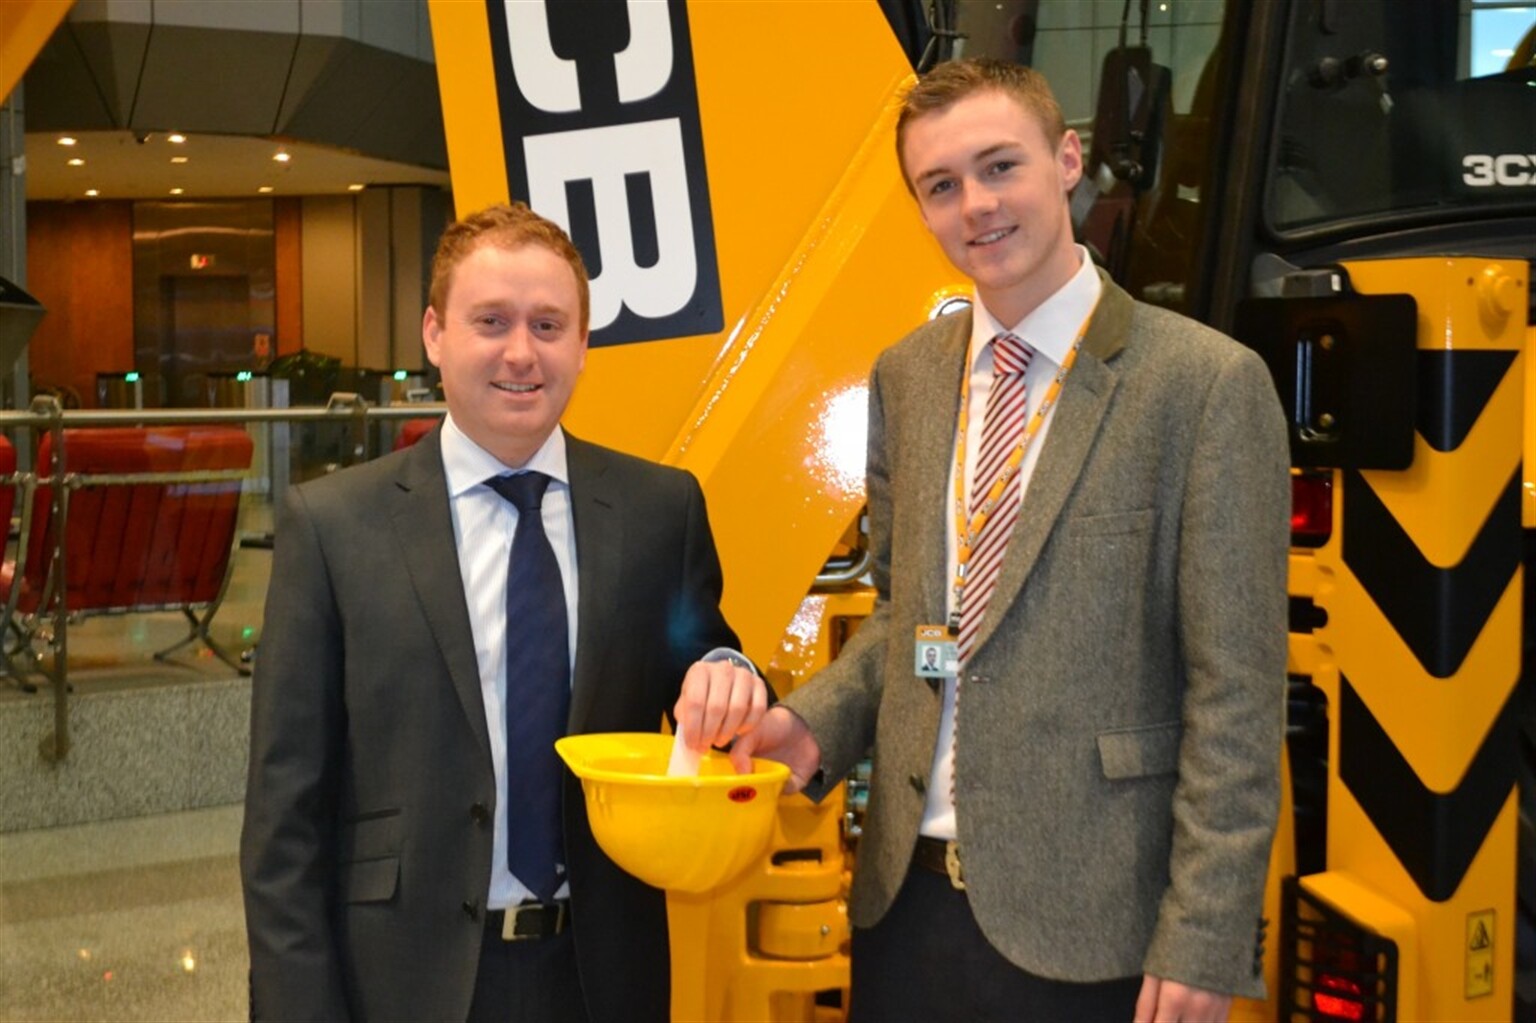 And the JCB model winners are …….